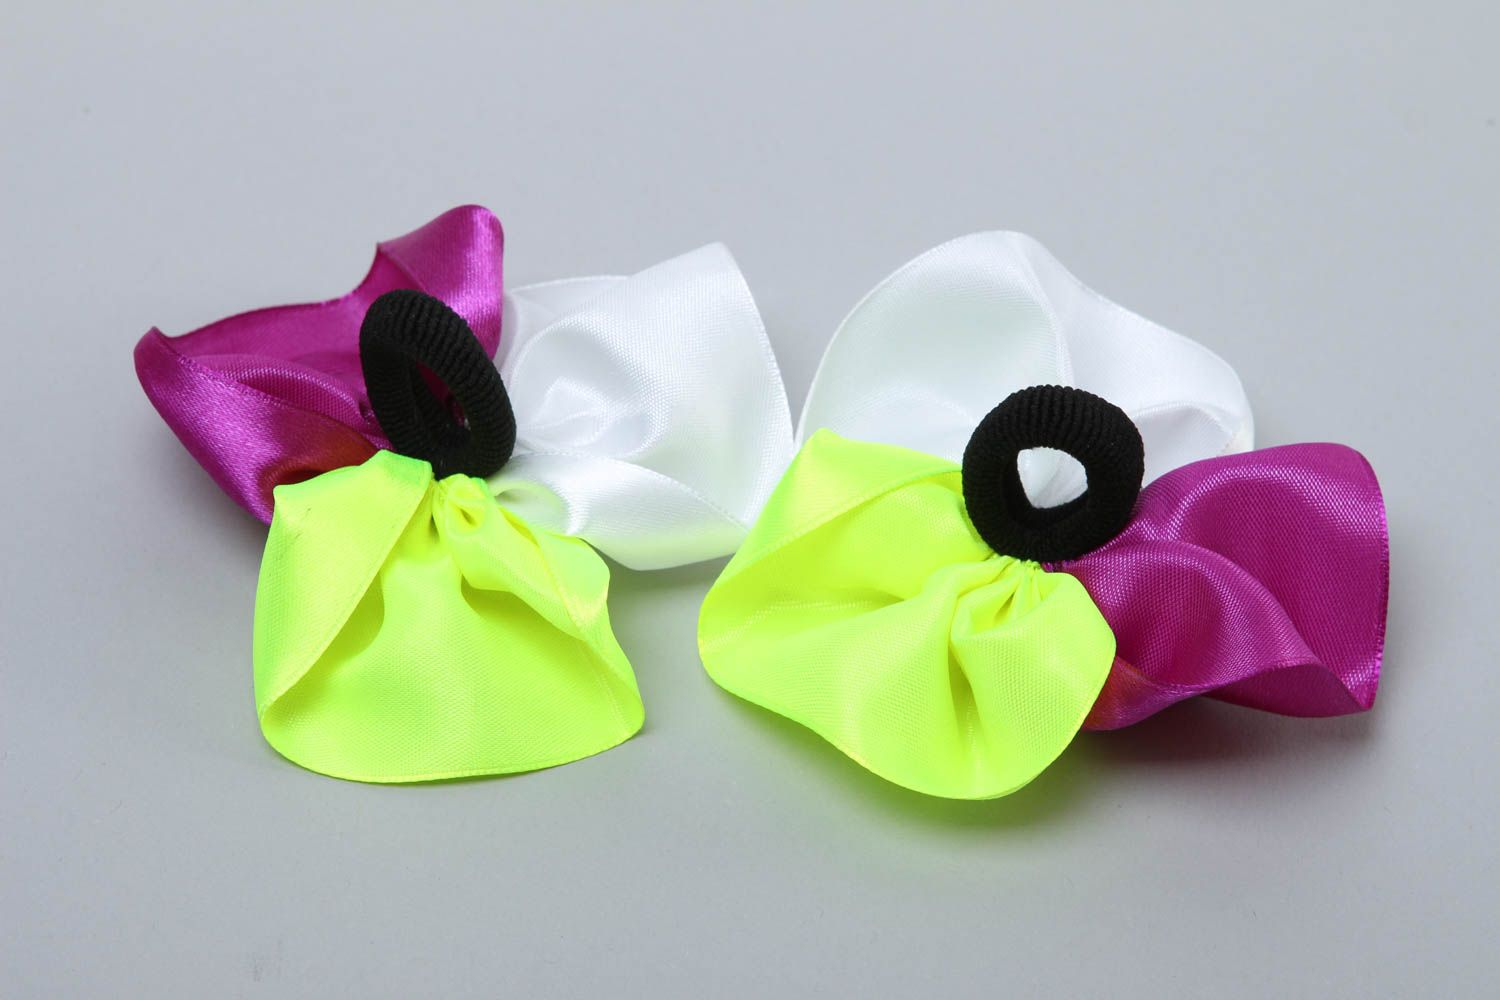 Handmade hair ties flower hair accessories gifts for girls hair decorations photo 4